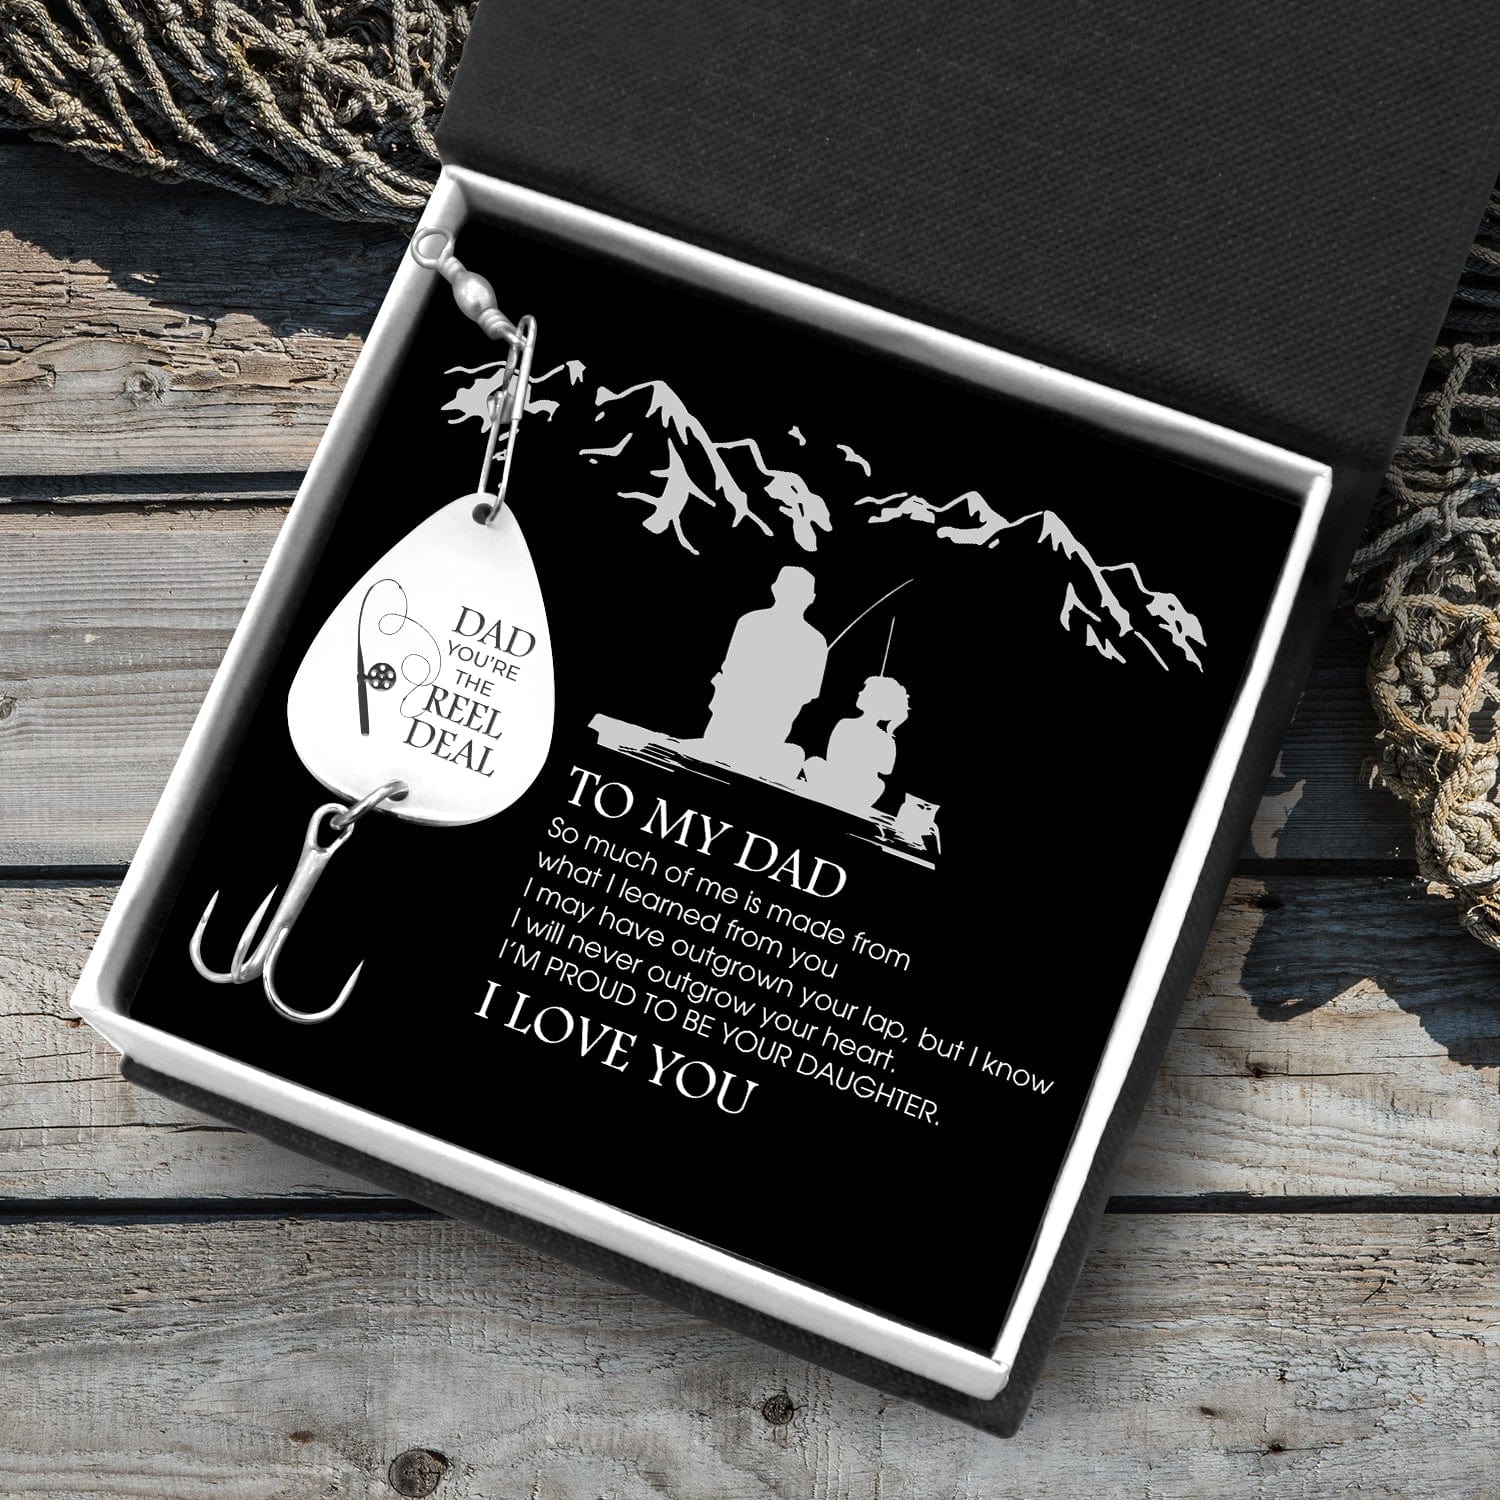 Engraved Fishing Hook - To Dad - From Daughter - You're The Reel Deal - What I Learned From You - Ukgfa18021